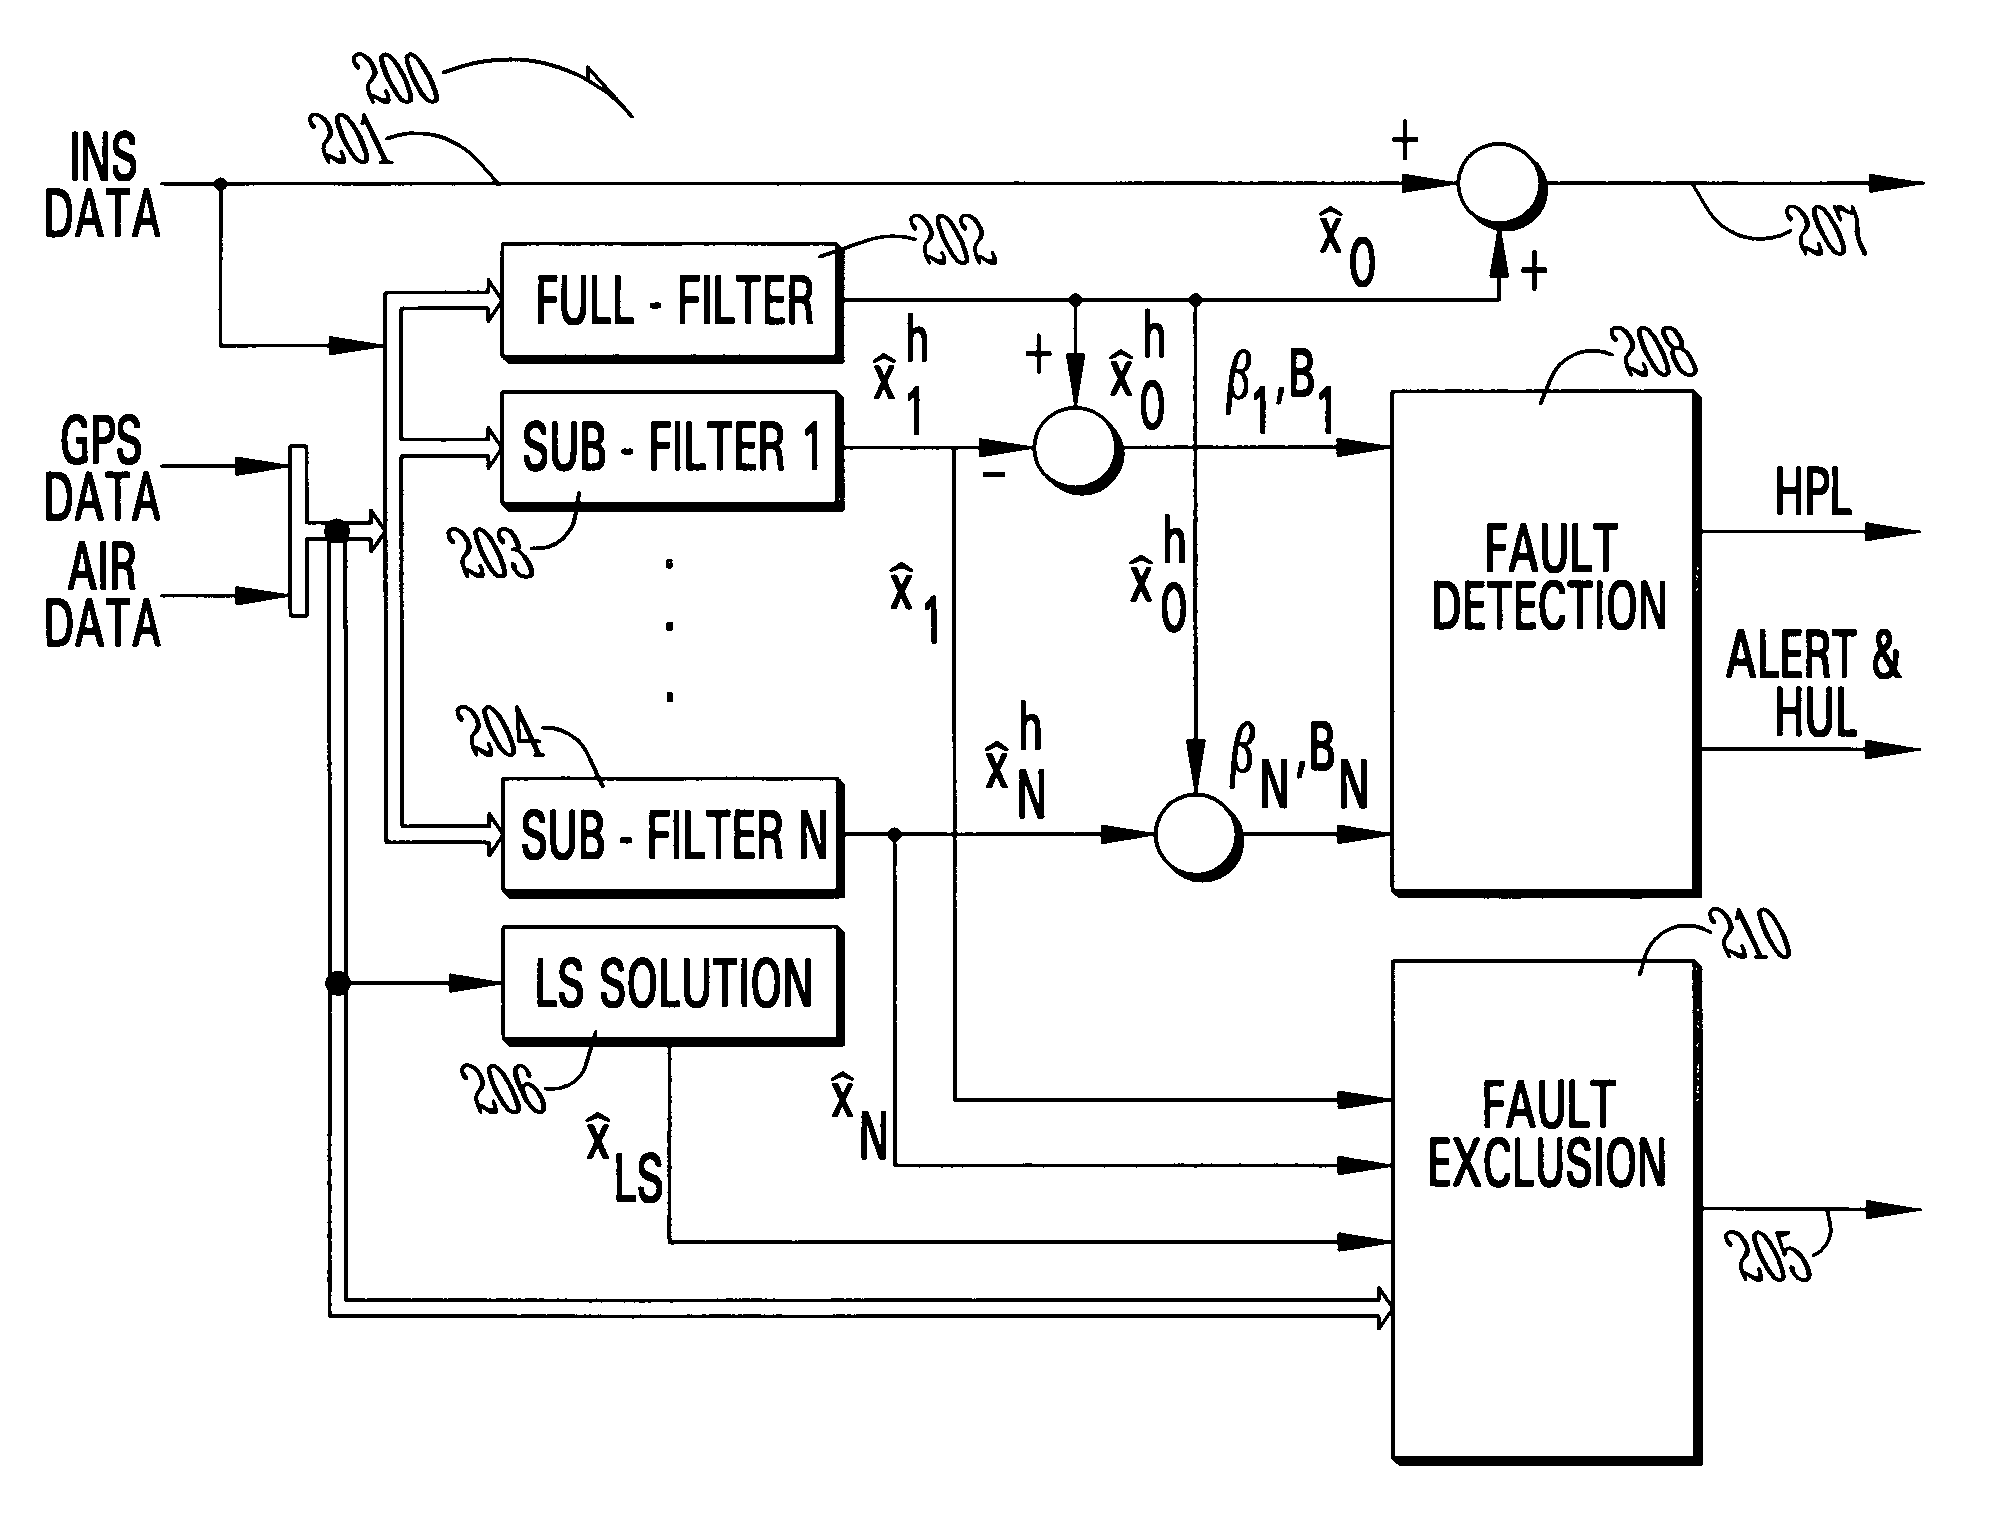 Method and system for fault detection and exclusion for multi-sensor navigation systems